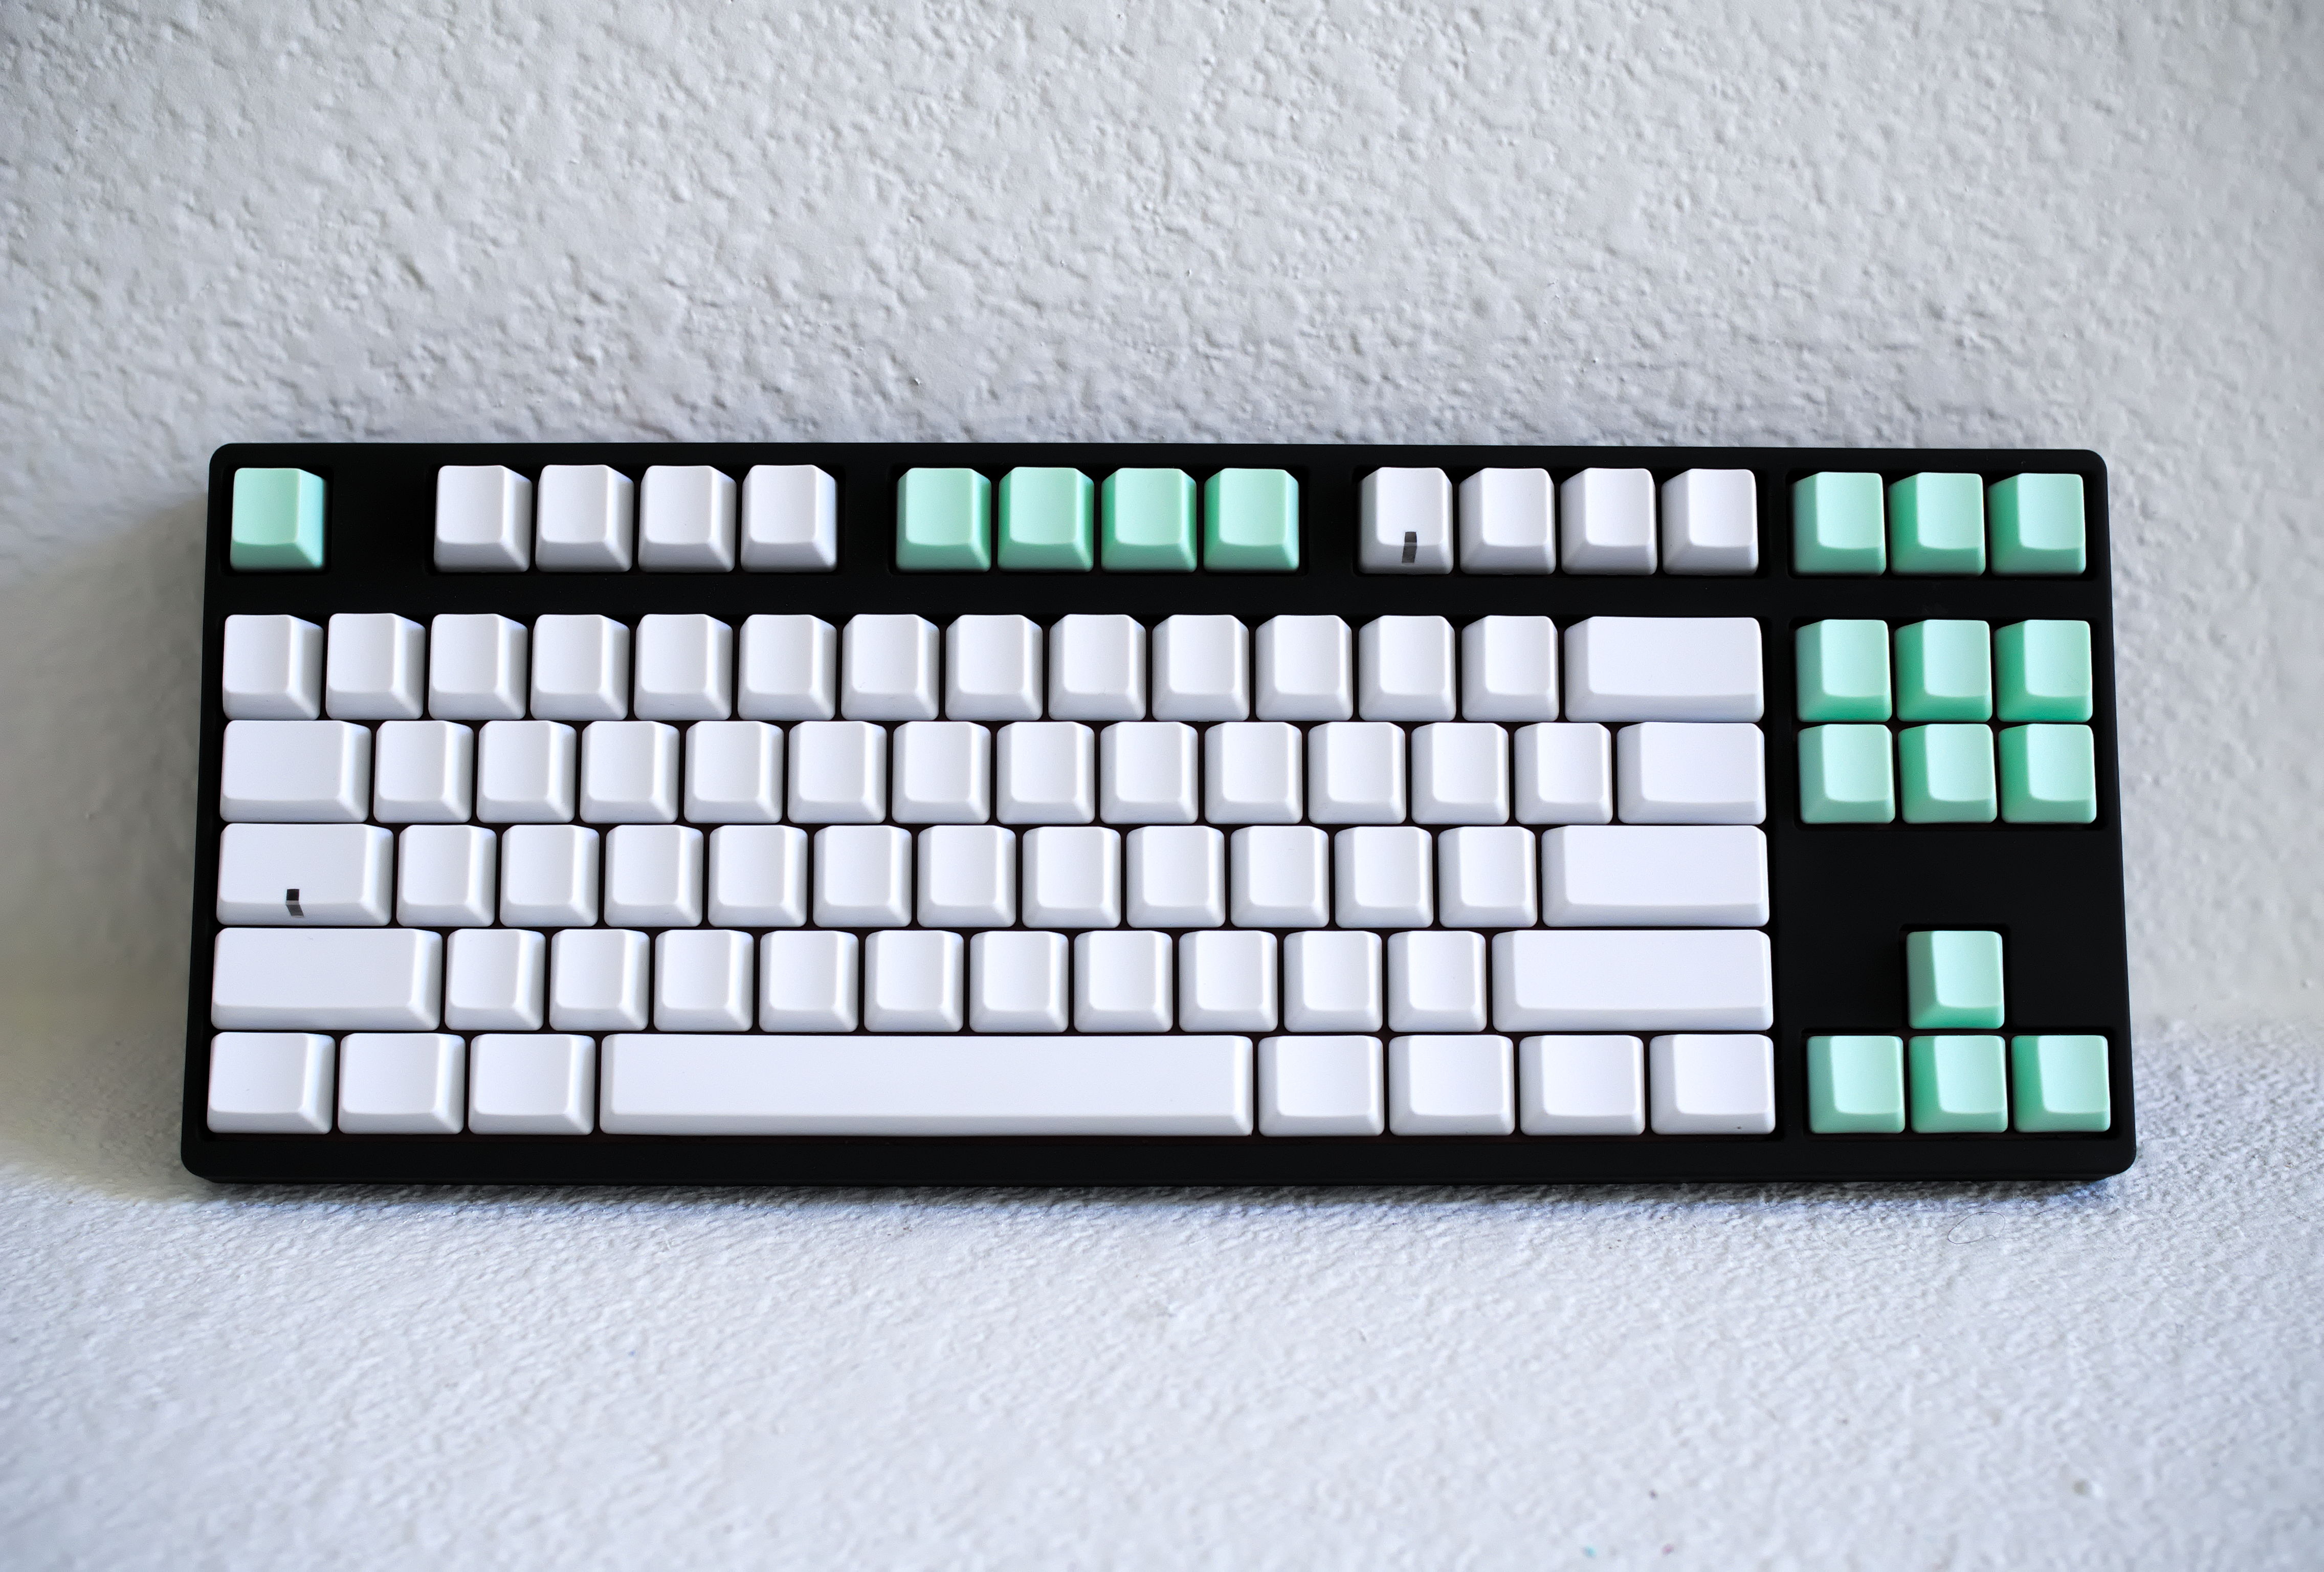 The Mint keycaps are a wee bit less saturated in real life unfortunately.